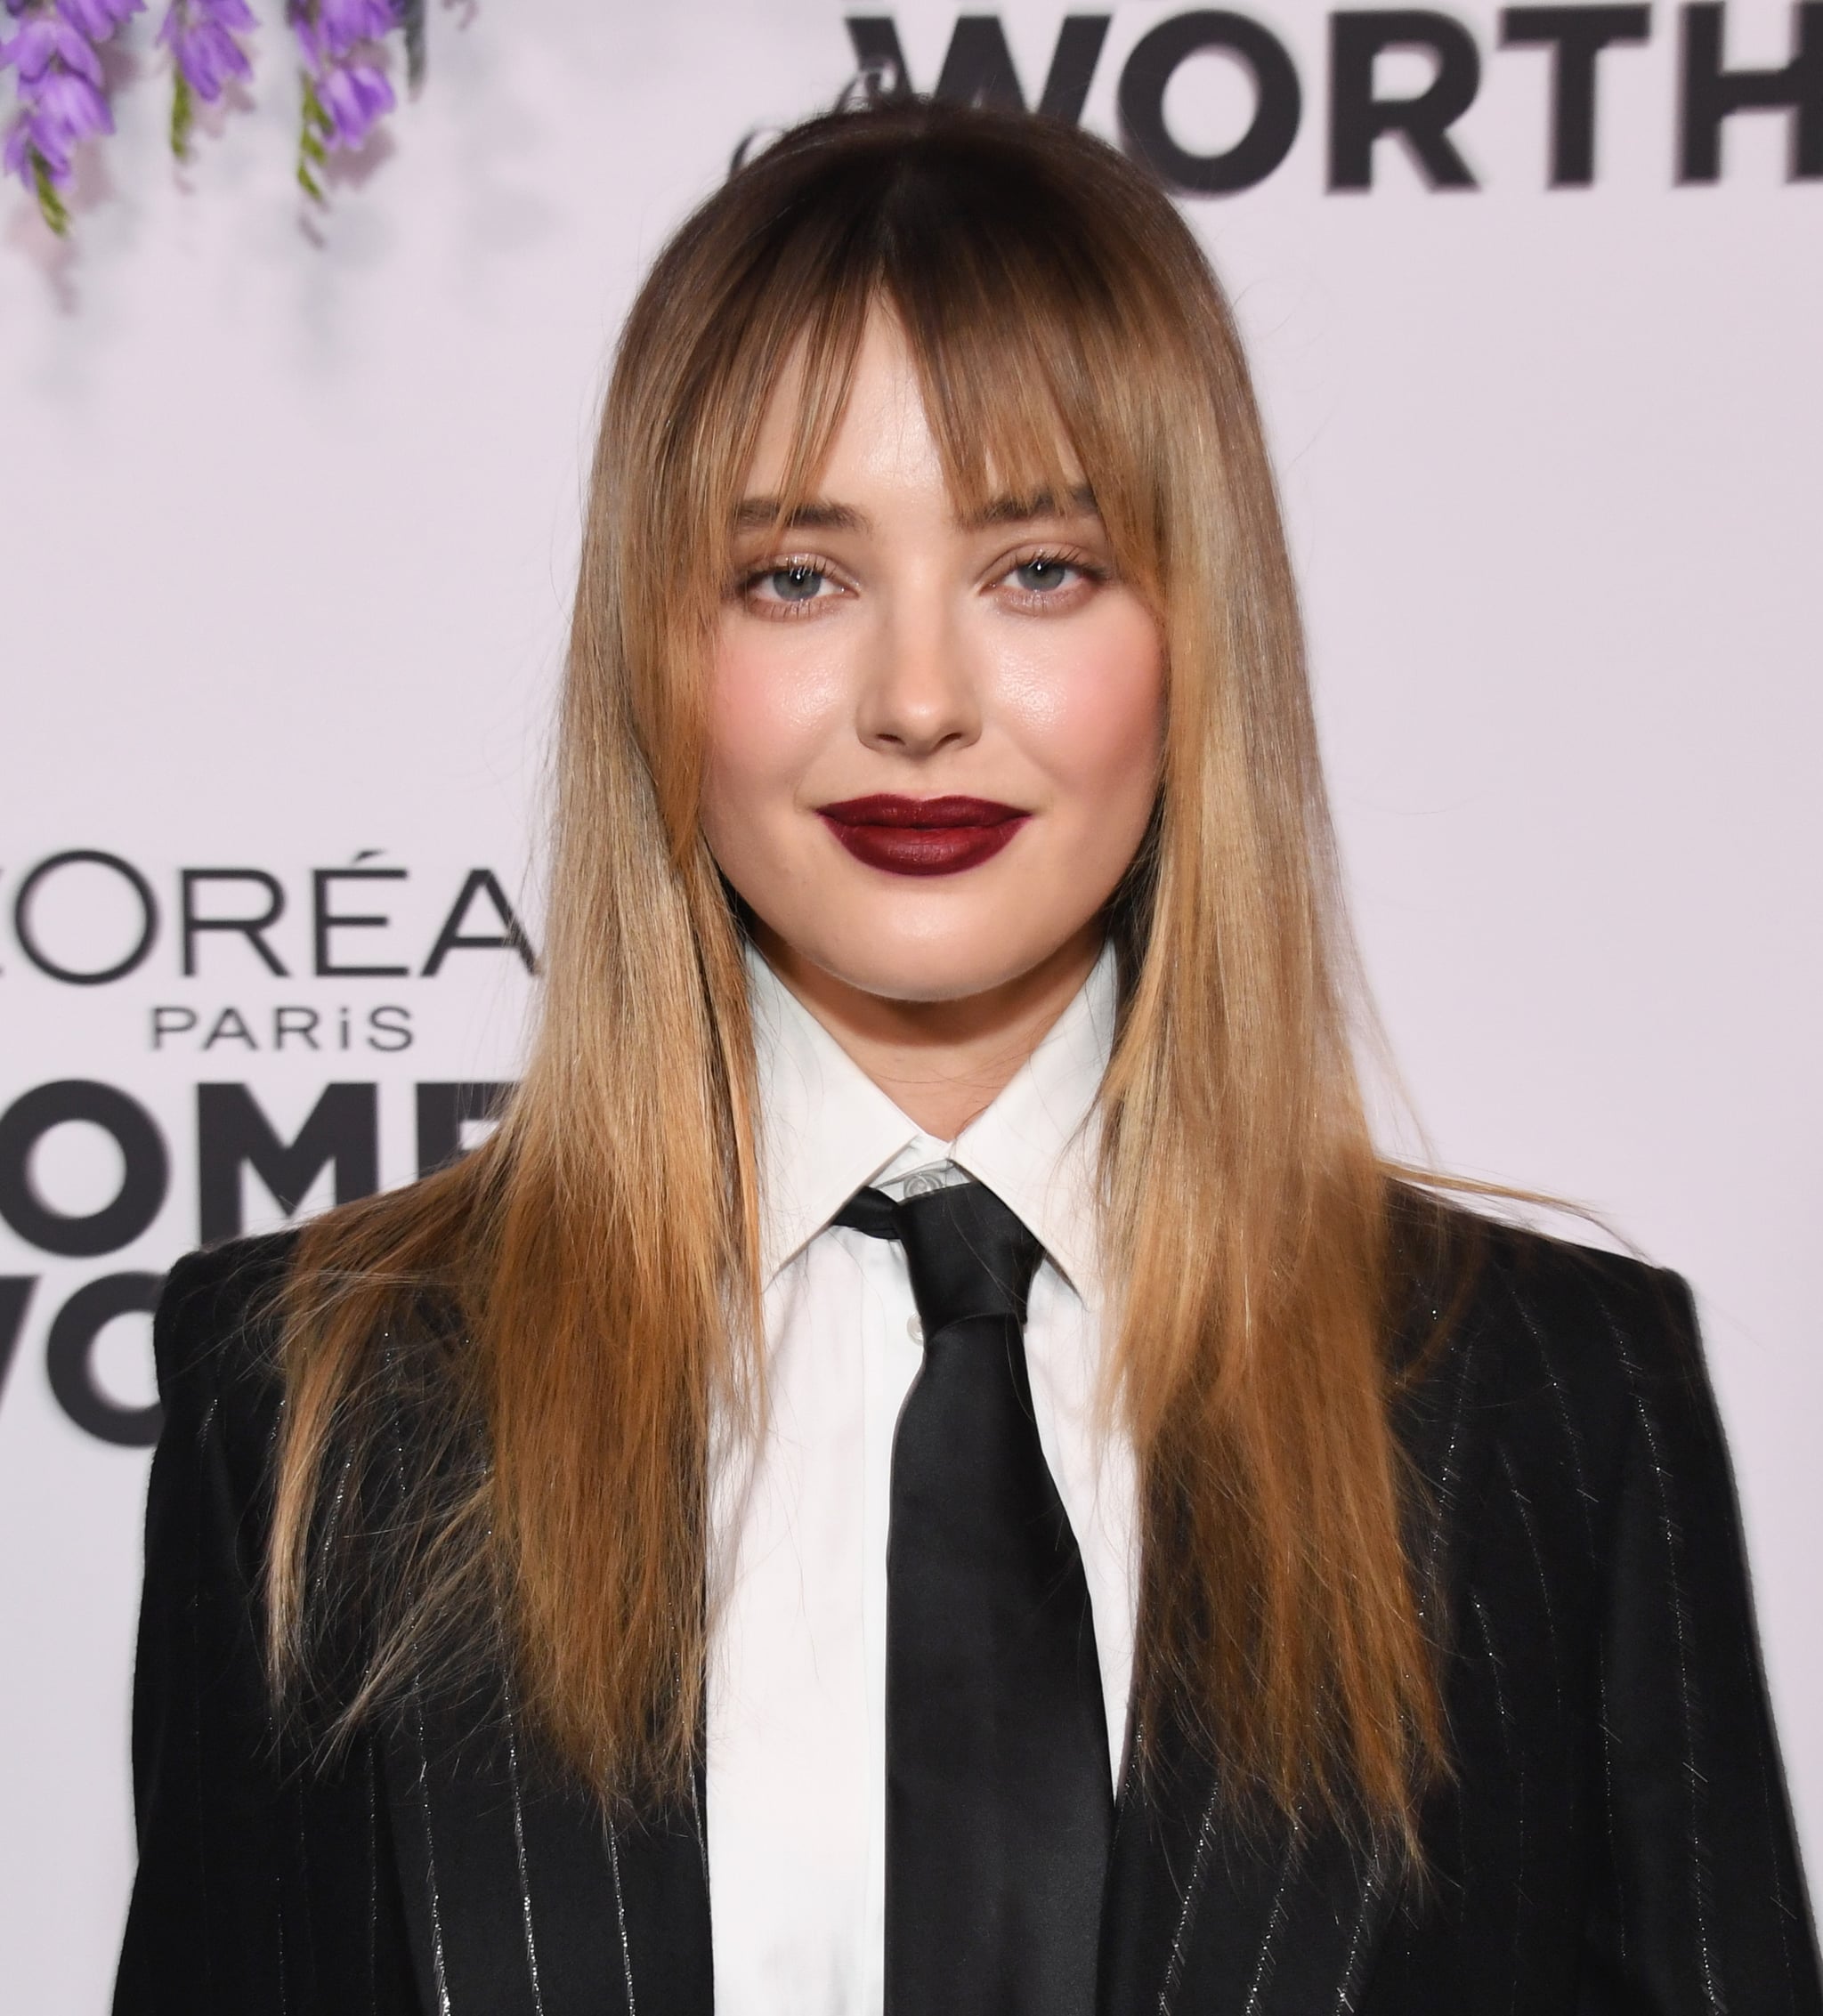 LOS ANGELES, CALIFORNIA - DECEMBER 01: Katherine Langford attends L'Oréal Paris' Women Of Worth Celebration at The Ebell Club of Los Angeles on December 01, 2022 in Los Angeles, California. (Photo by Jon Kopaloff/Getty Images)